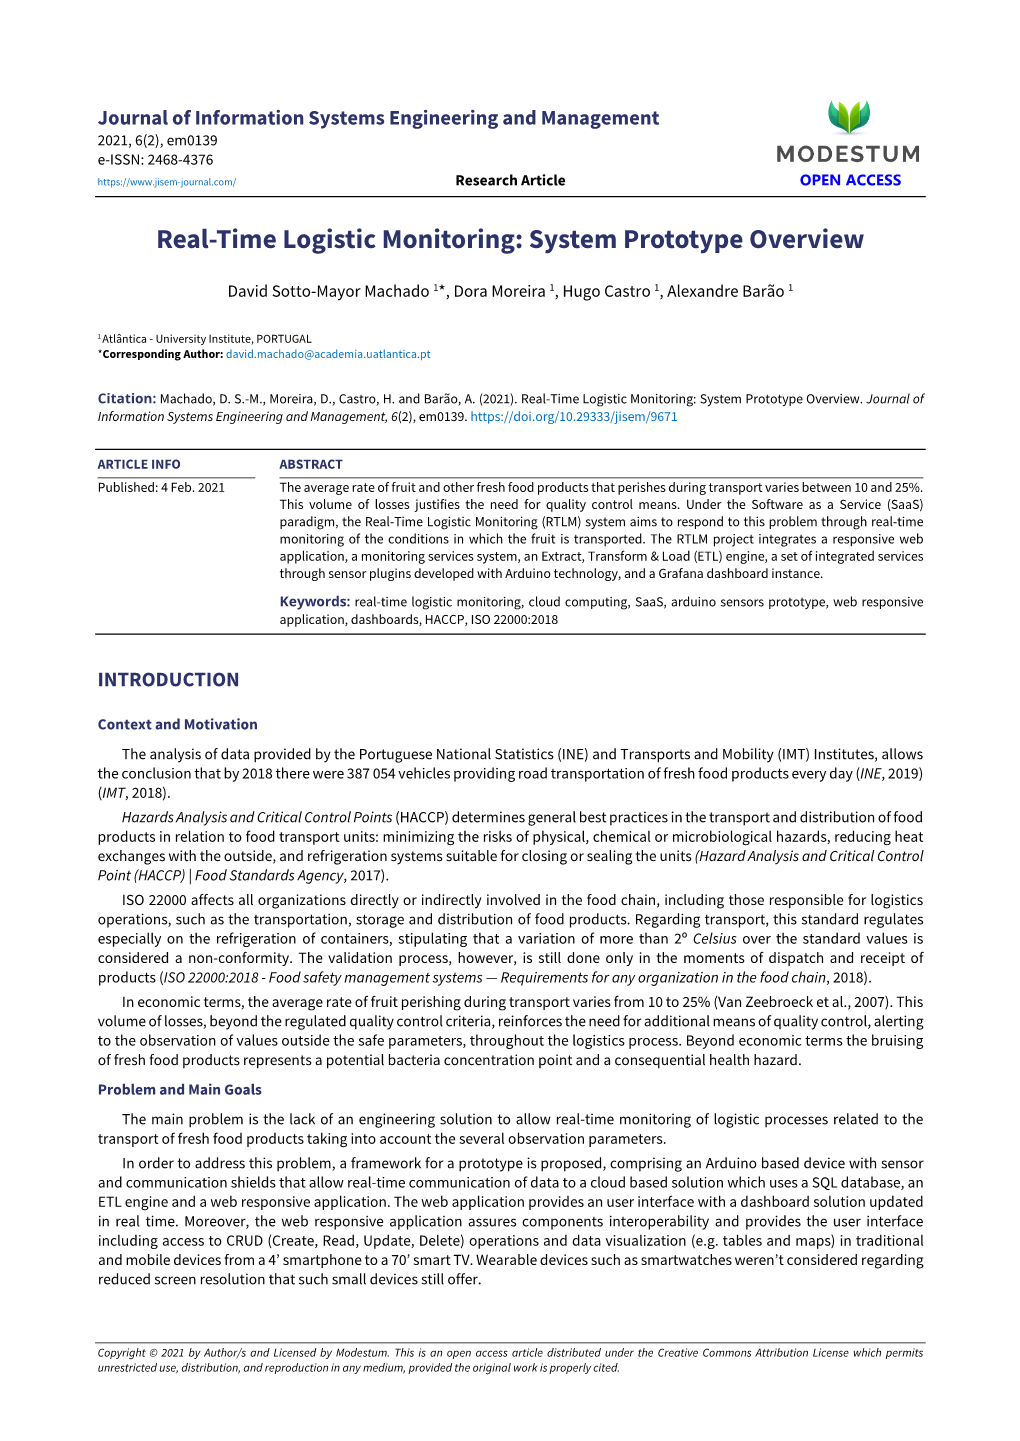 Real-Time Logistic Monitoring: System Prototype Overview